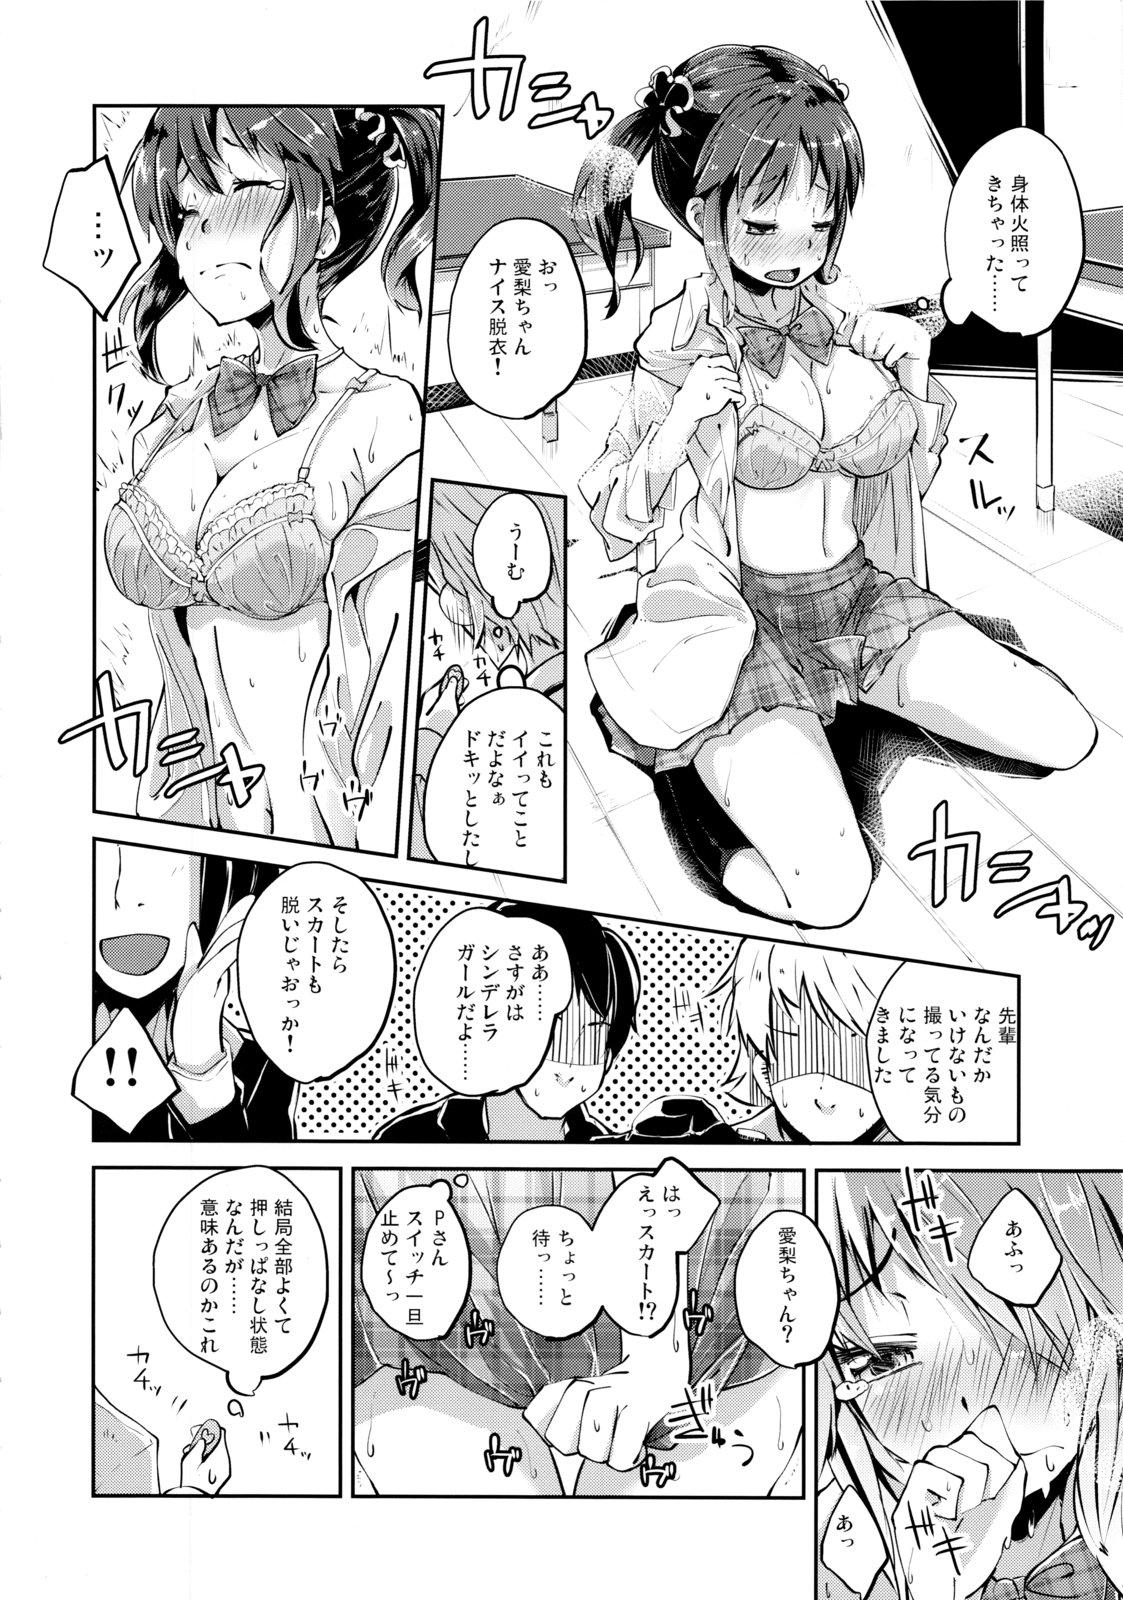 Hardcore Porno To To Dolce - The idolmaster Old Man - Page 5